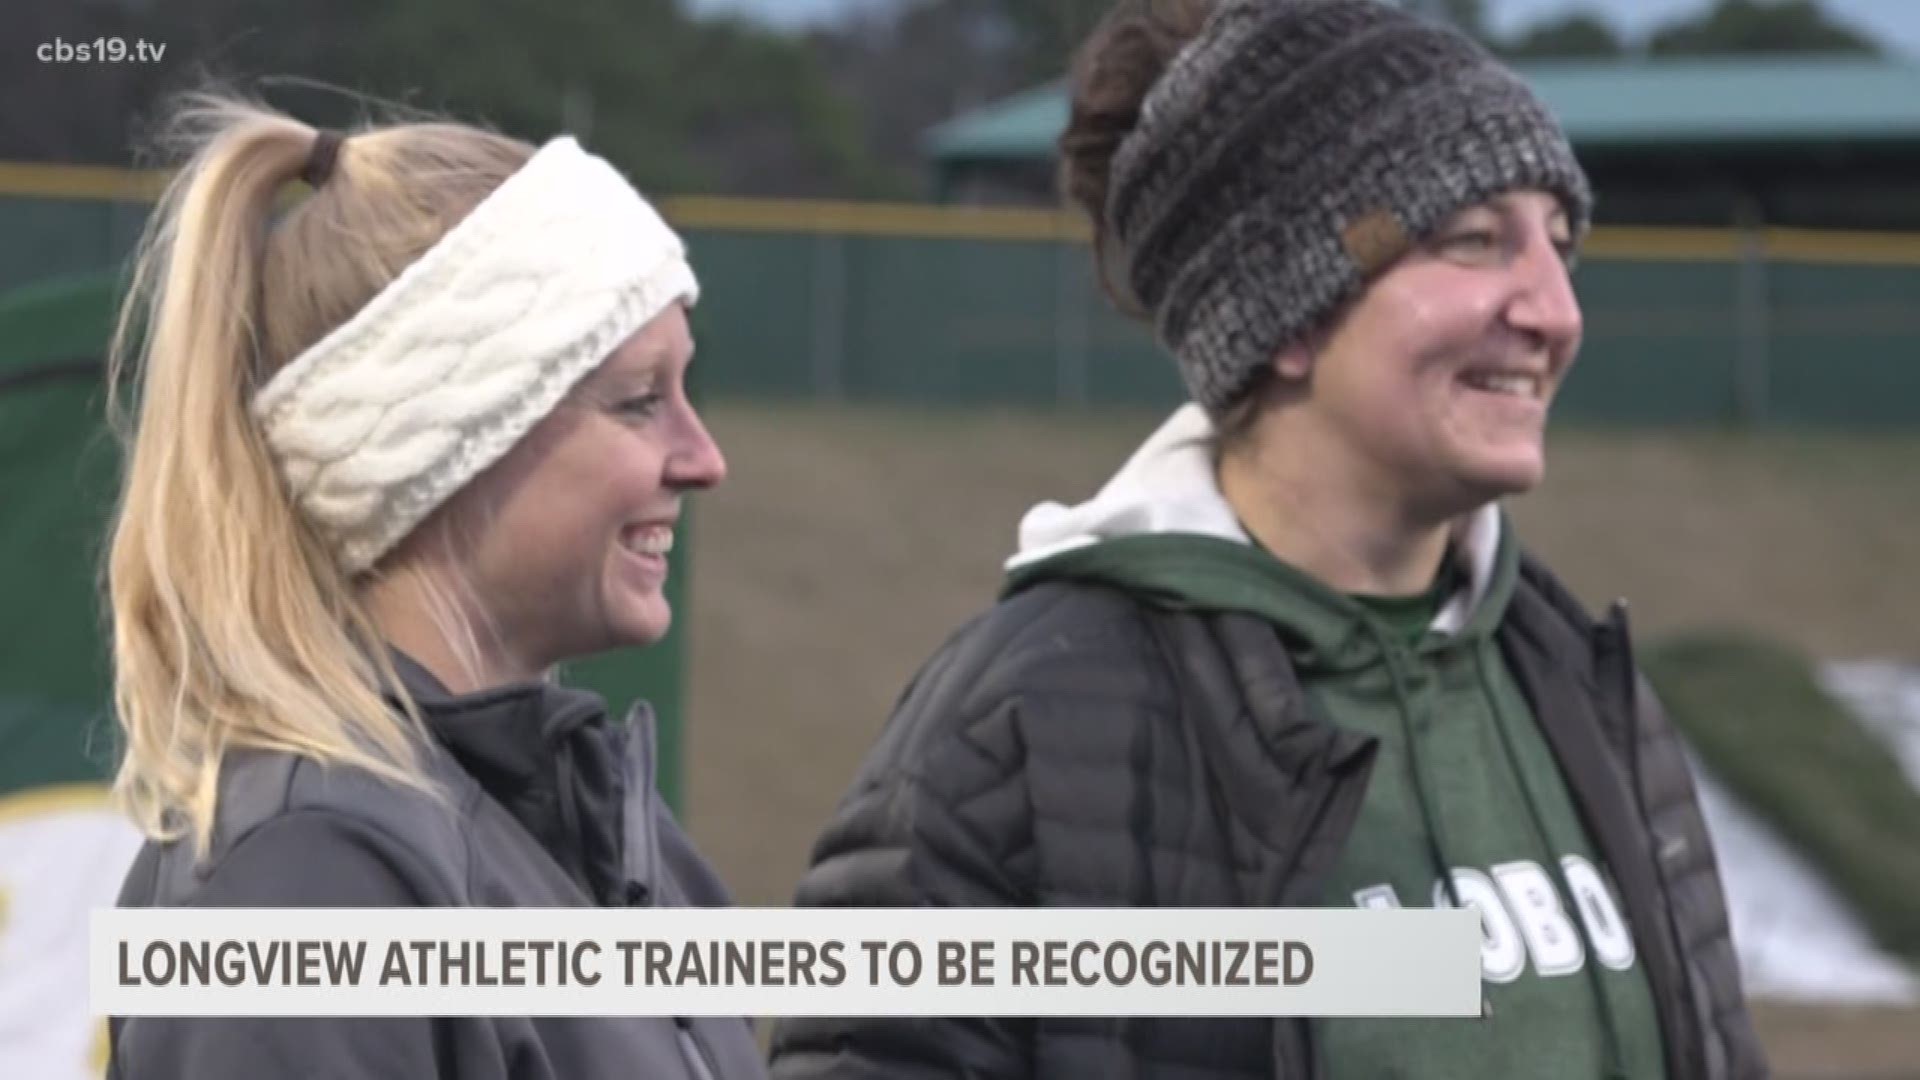 Longview athletic trainers Dierdre Scotter and Kristin Croley were recognized by the Advisory Board of Athletic Directors on Monday for their role in helping save a cross country coach's life.